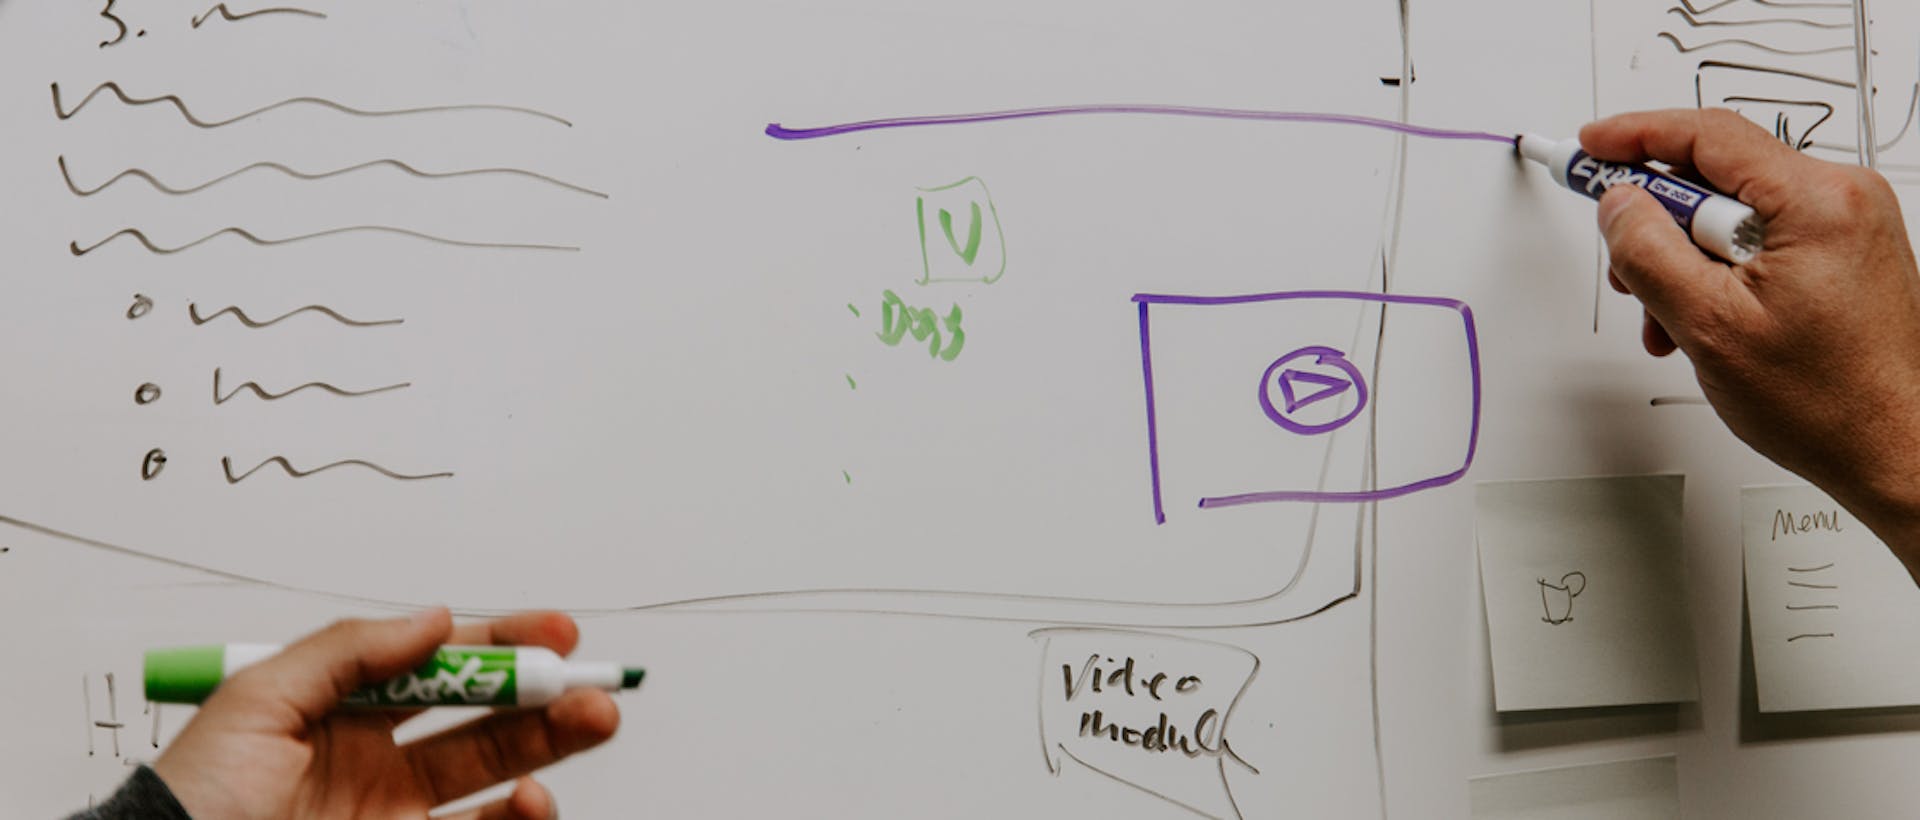 two people writing on a whiteboard with purple and green markers